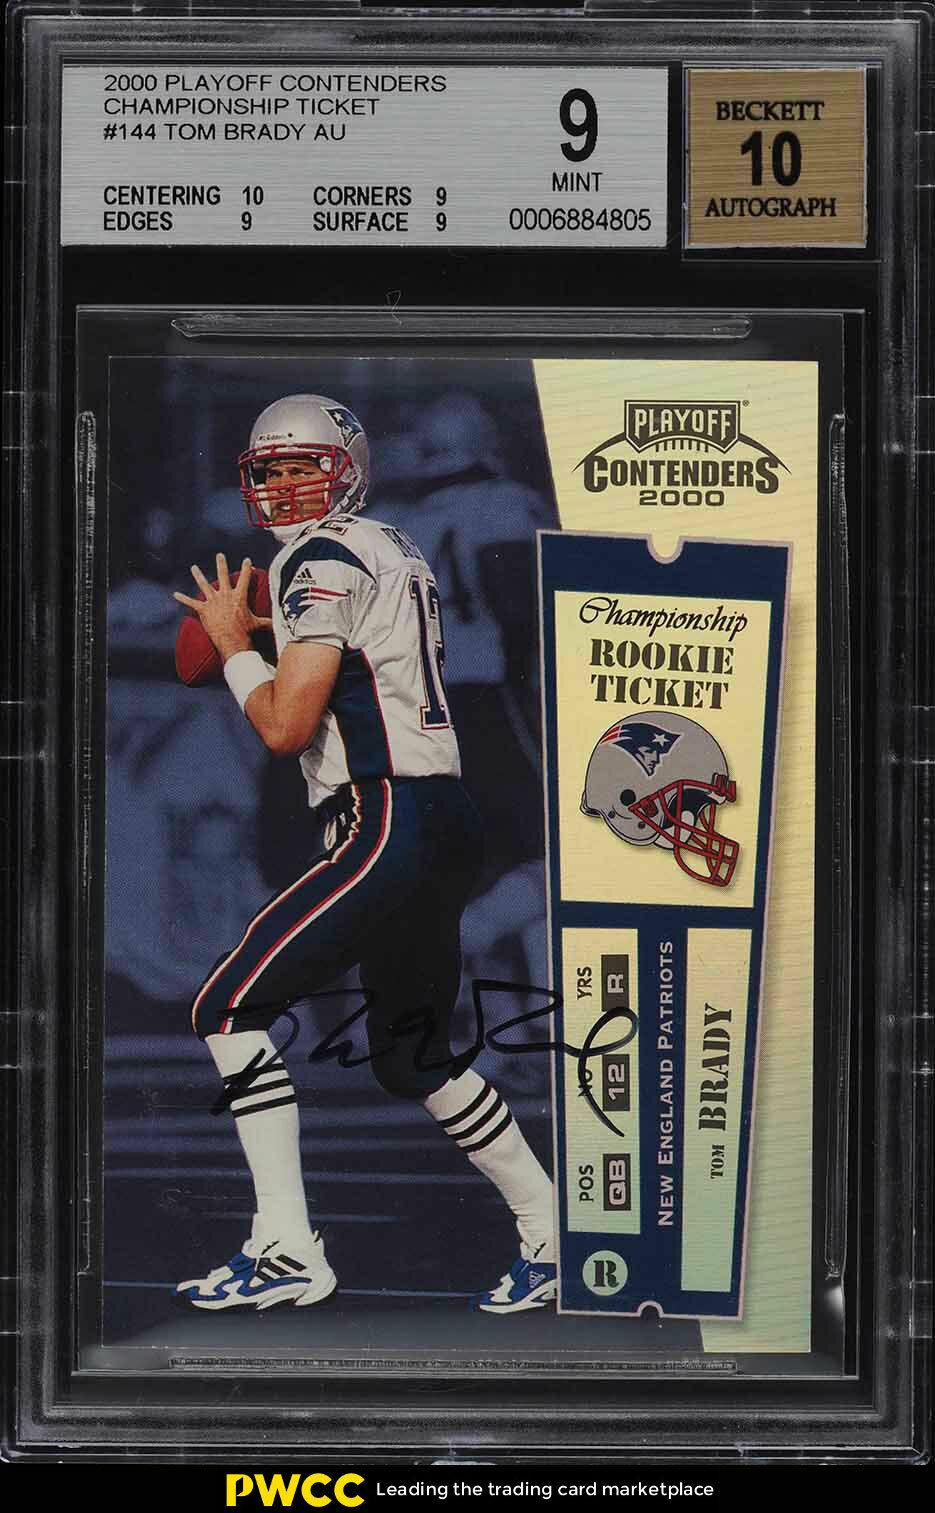 Tom Brady rookie card sells for record $1.32 million